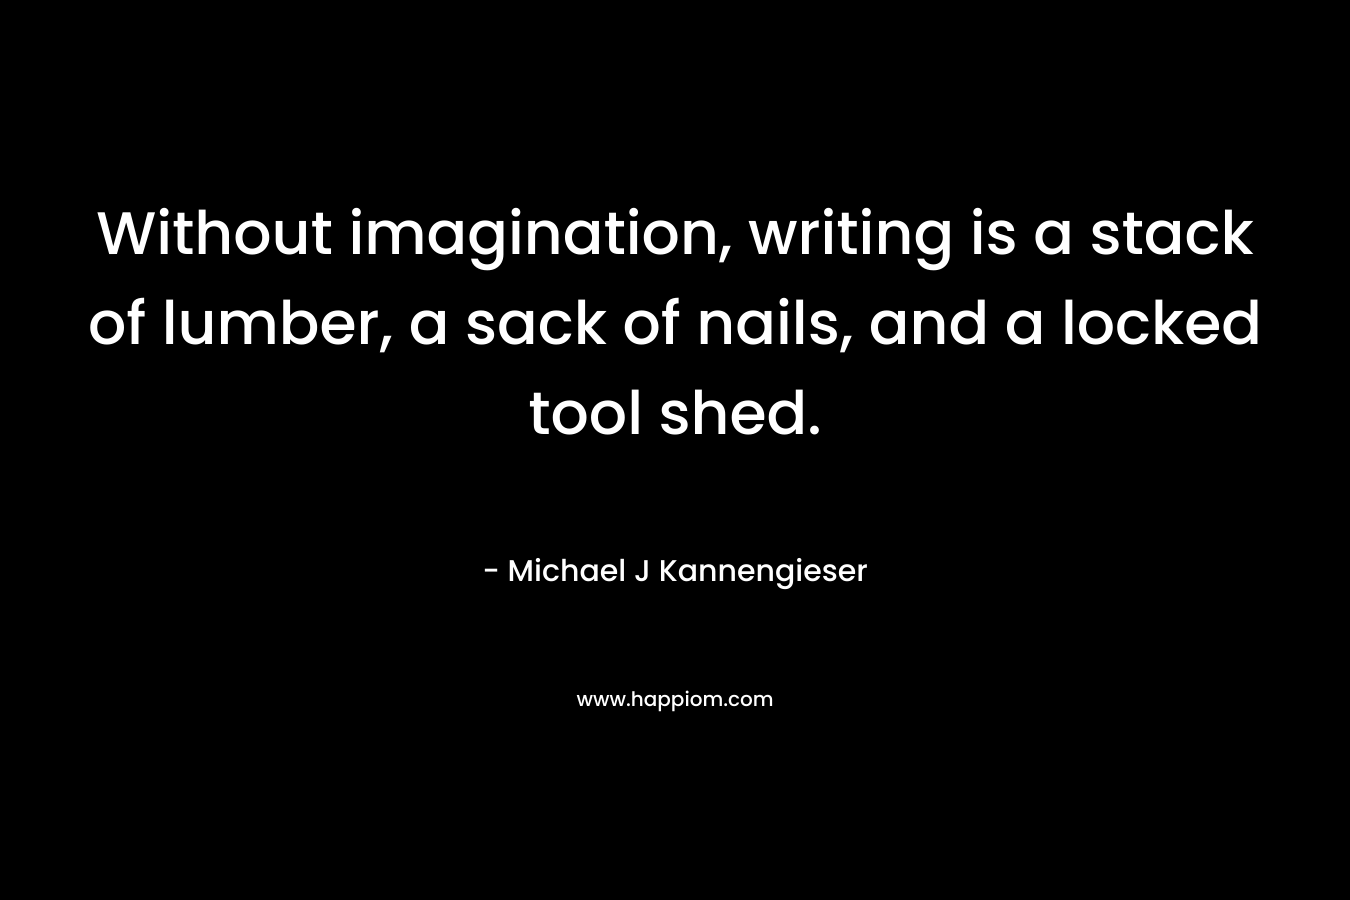 Without imagination, writing is a stack of lumber, a sack of nails, and a locked tool shed.